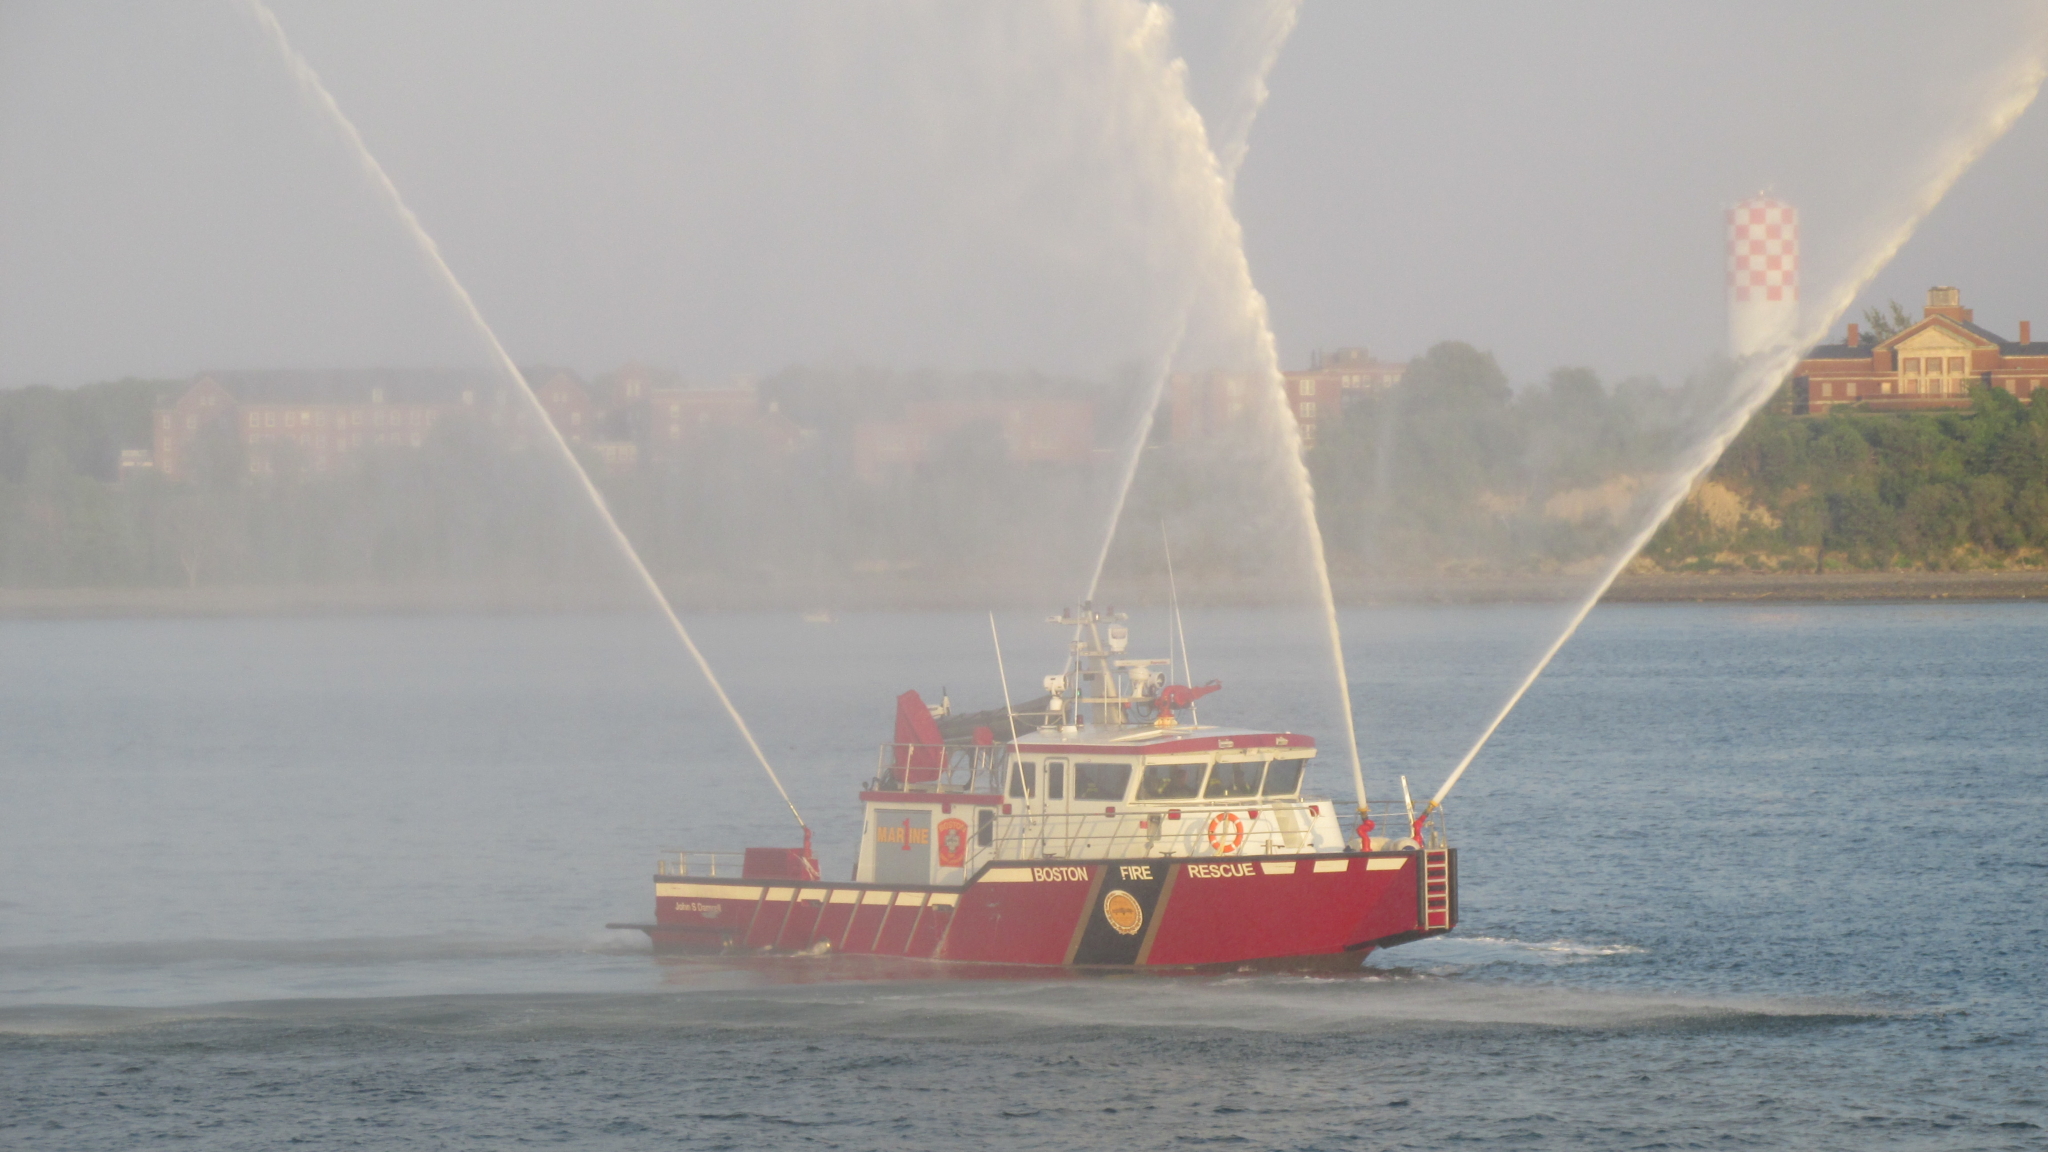 A traditional part of the Annual Club Cruise – a Massport fire boat greets the Provincetown II. That boat can pump around 500 gallons per minute.